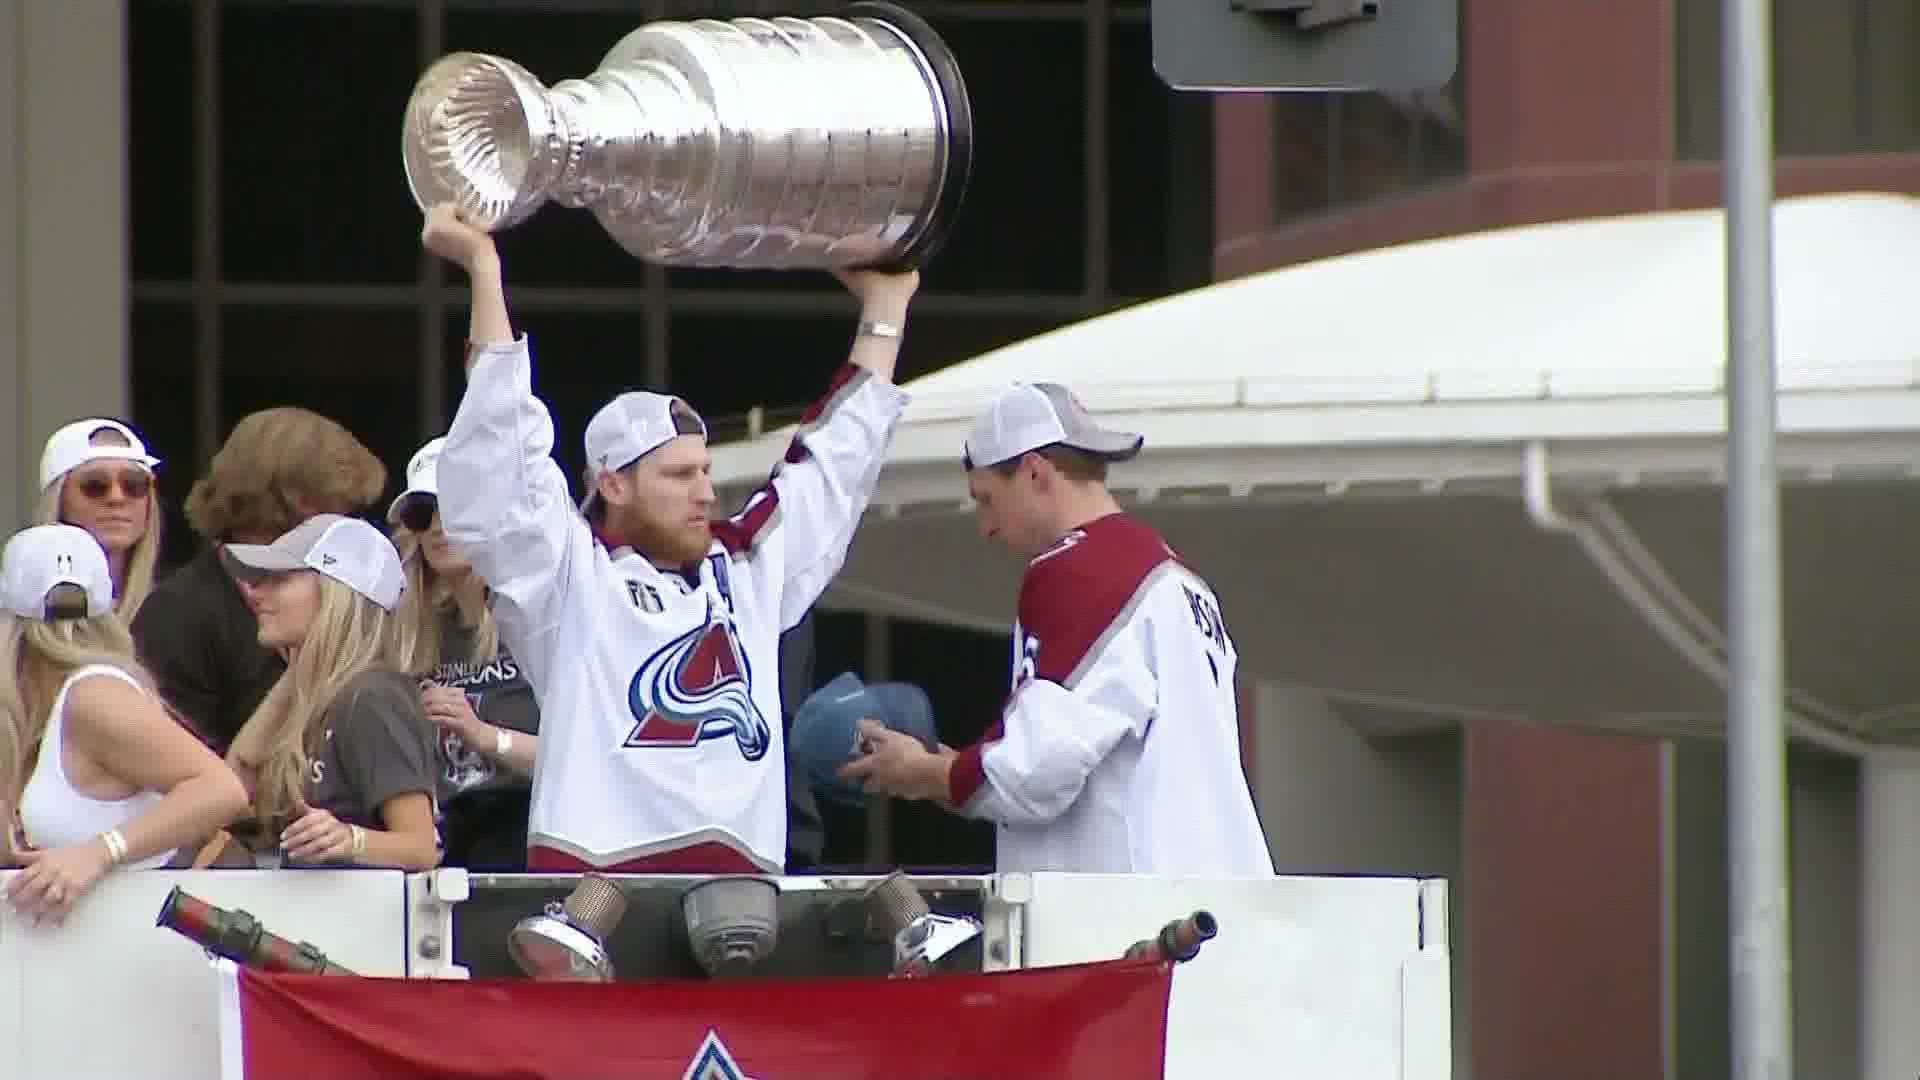 Want some Avalanche Stanley Cup champions gear? Better act fast